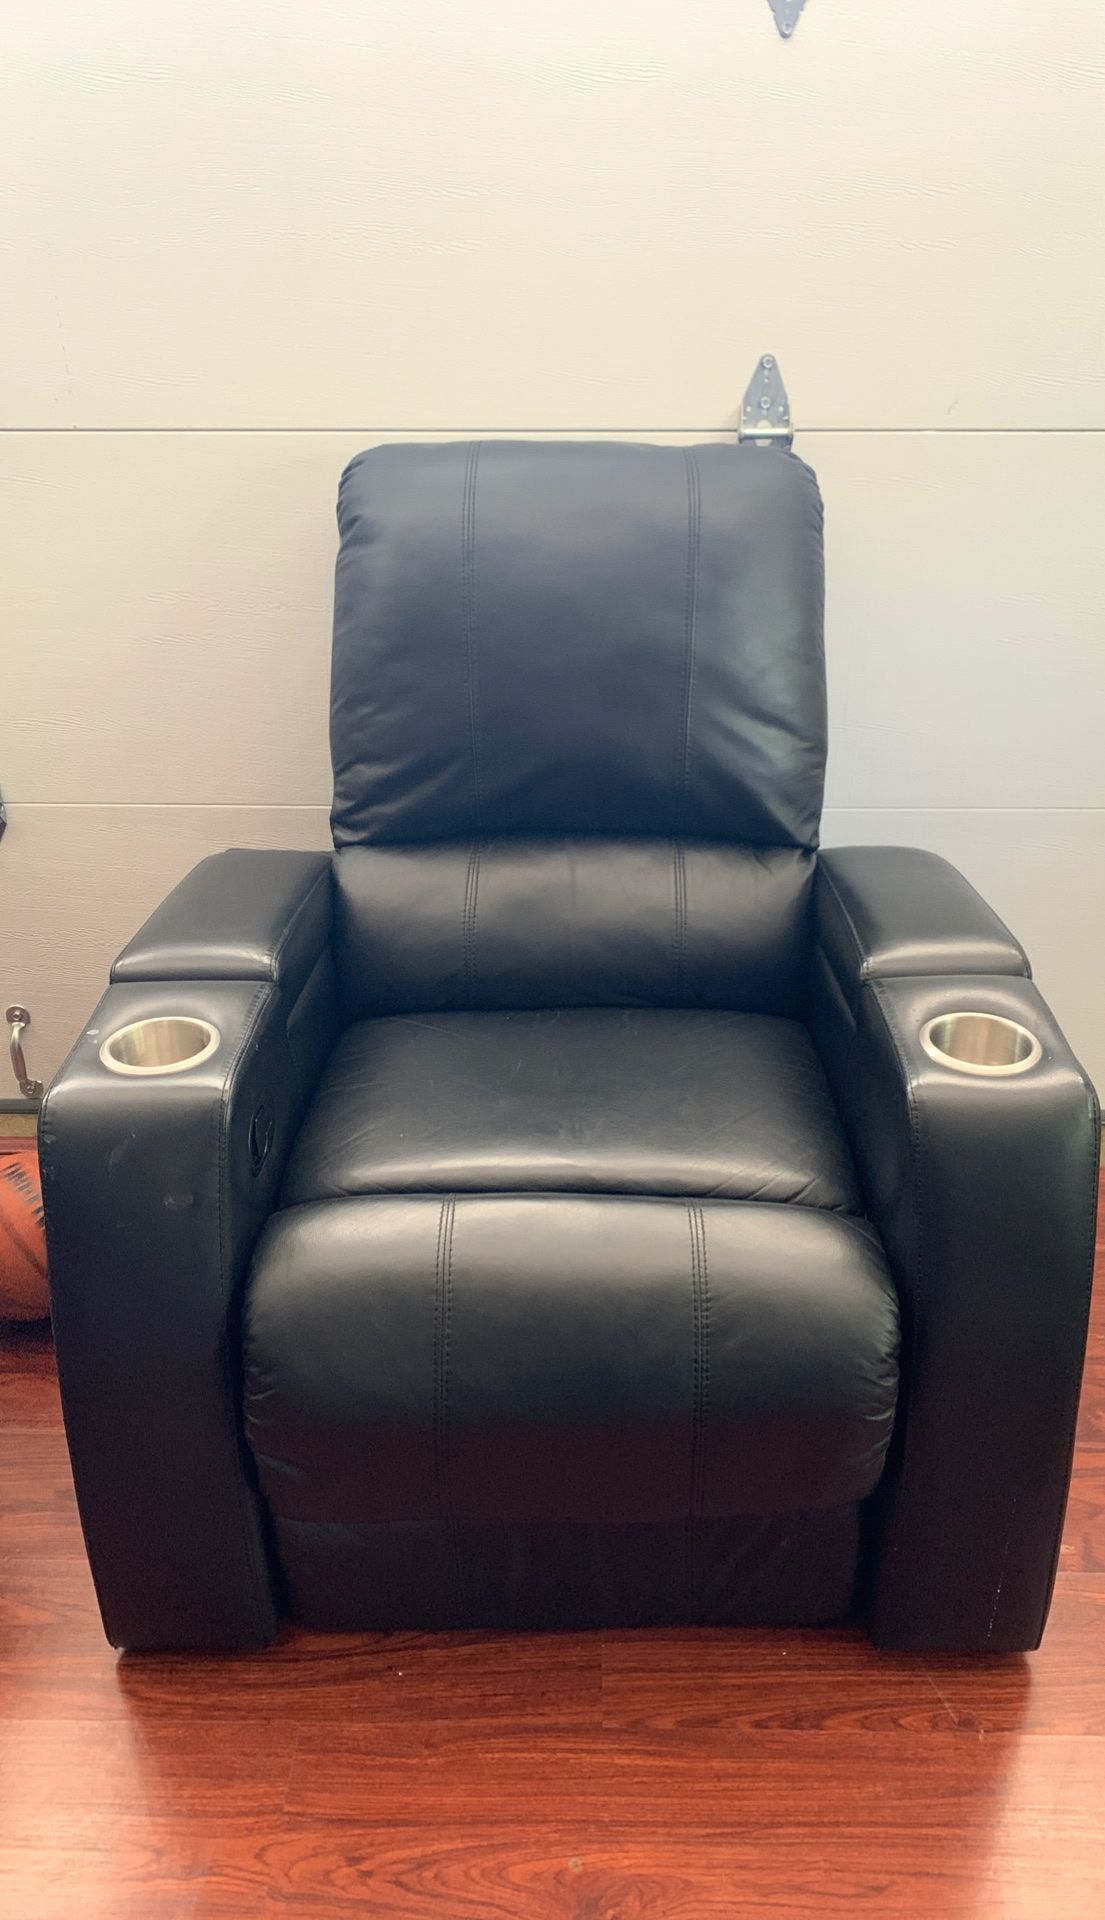 Black leather Recliner Chair